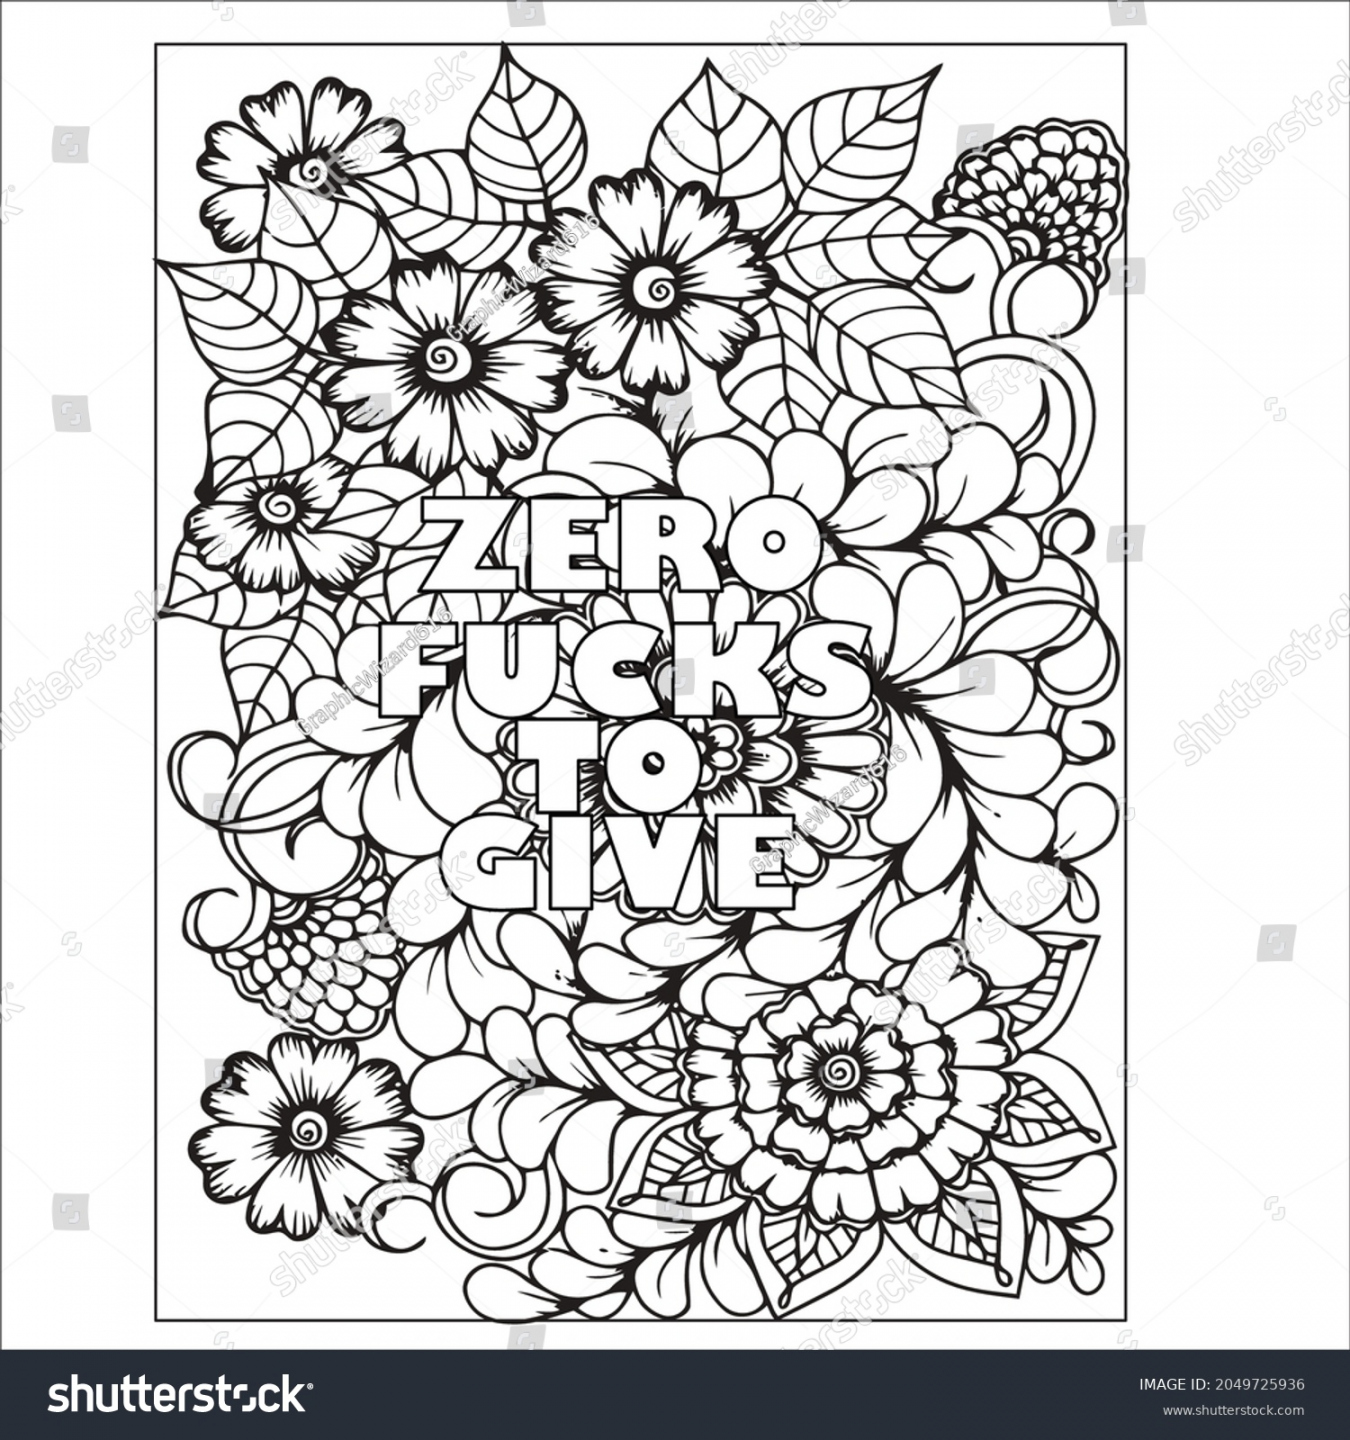 , Swear Words Coloring Images, Stock Photos & Vectors  - FREE Printables - Free Printable Inappropriate Coloring Pages For Adults